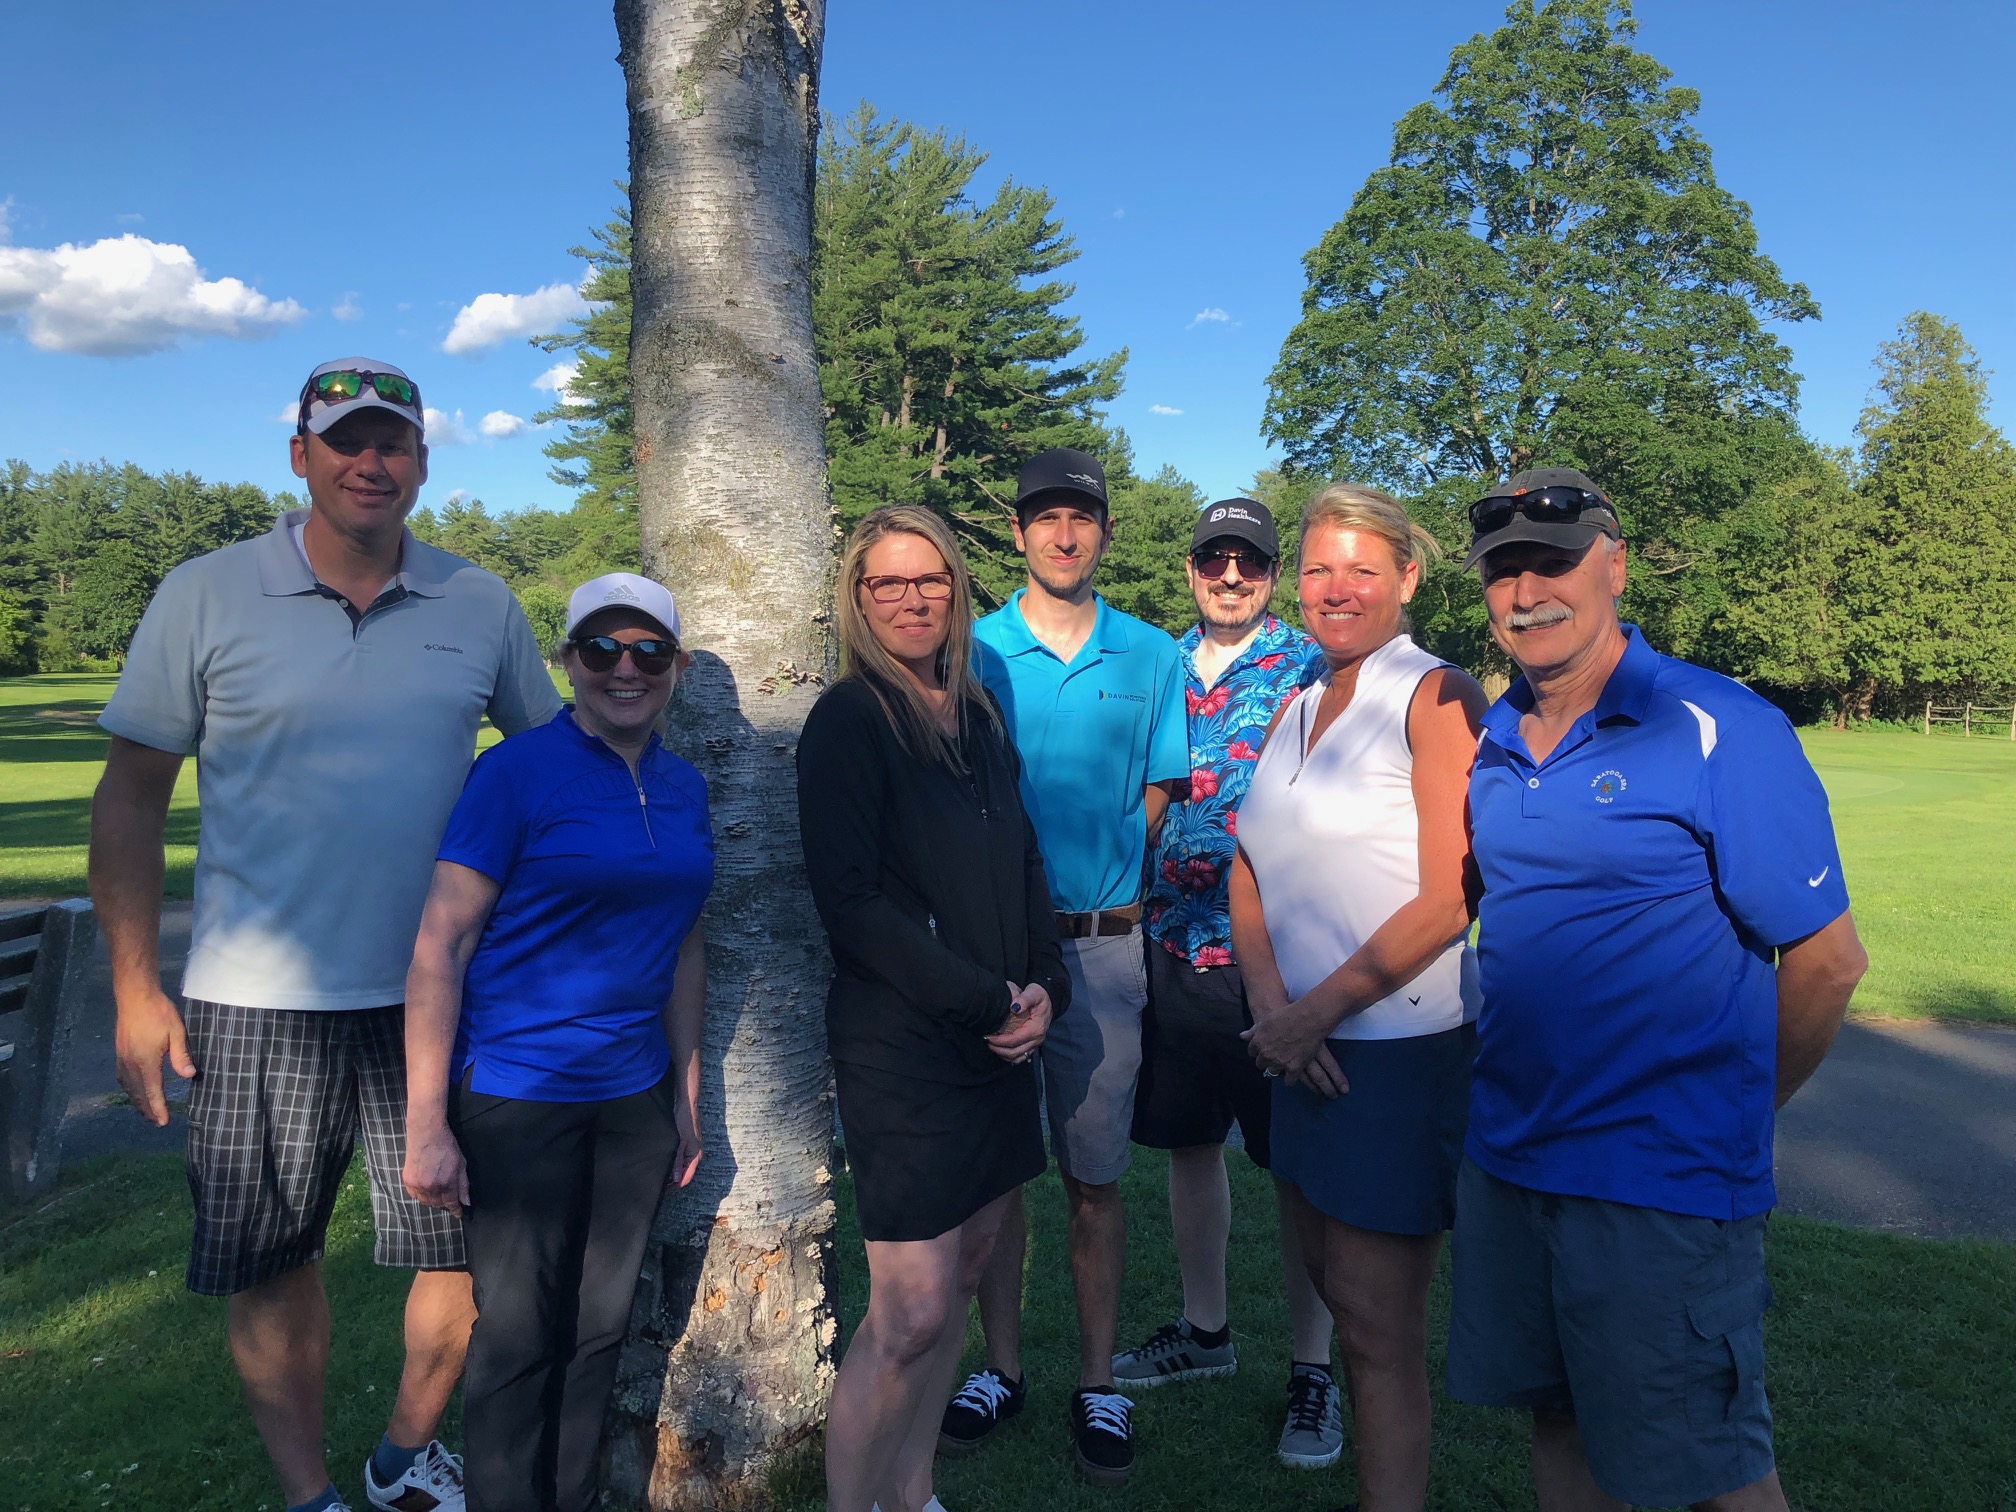 The Davin Healthcare Team on their weekly golfing outting. 